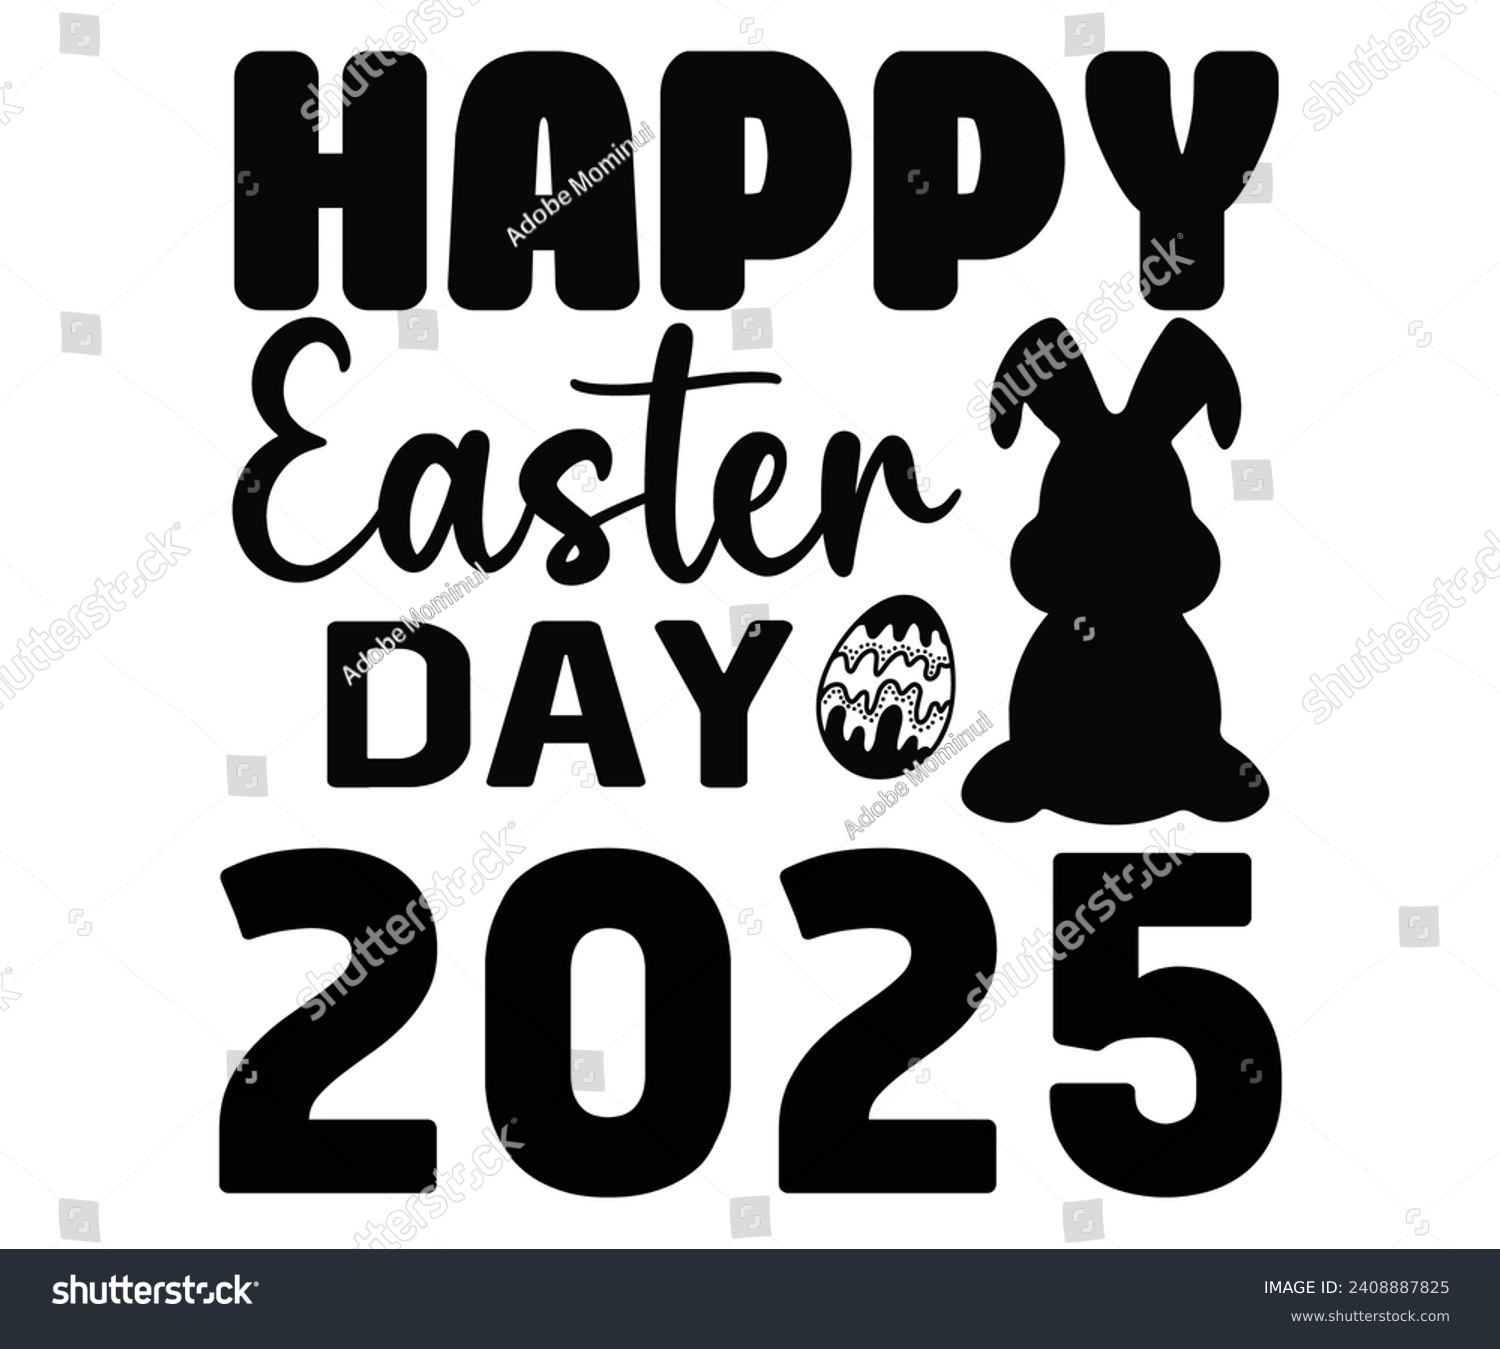 SVG of Happy Easter Day 2025 Svg,Happy Easter Svg,Png,Bunny Svg,Retro Easter Svg,Easter Quotes,Spring Svg,Easter Shirt Svg,Easter Gift Svg,Funny Easter Svg,Bunny Day, Egg for Kids,Cut Files,Cricut, svg